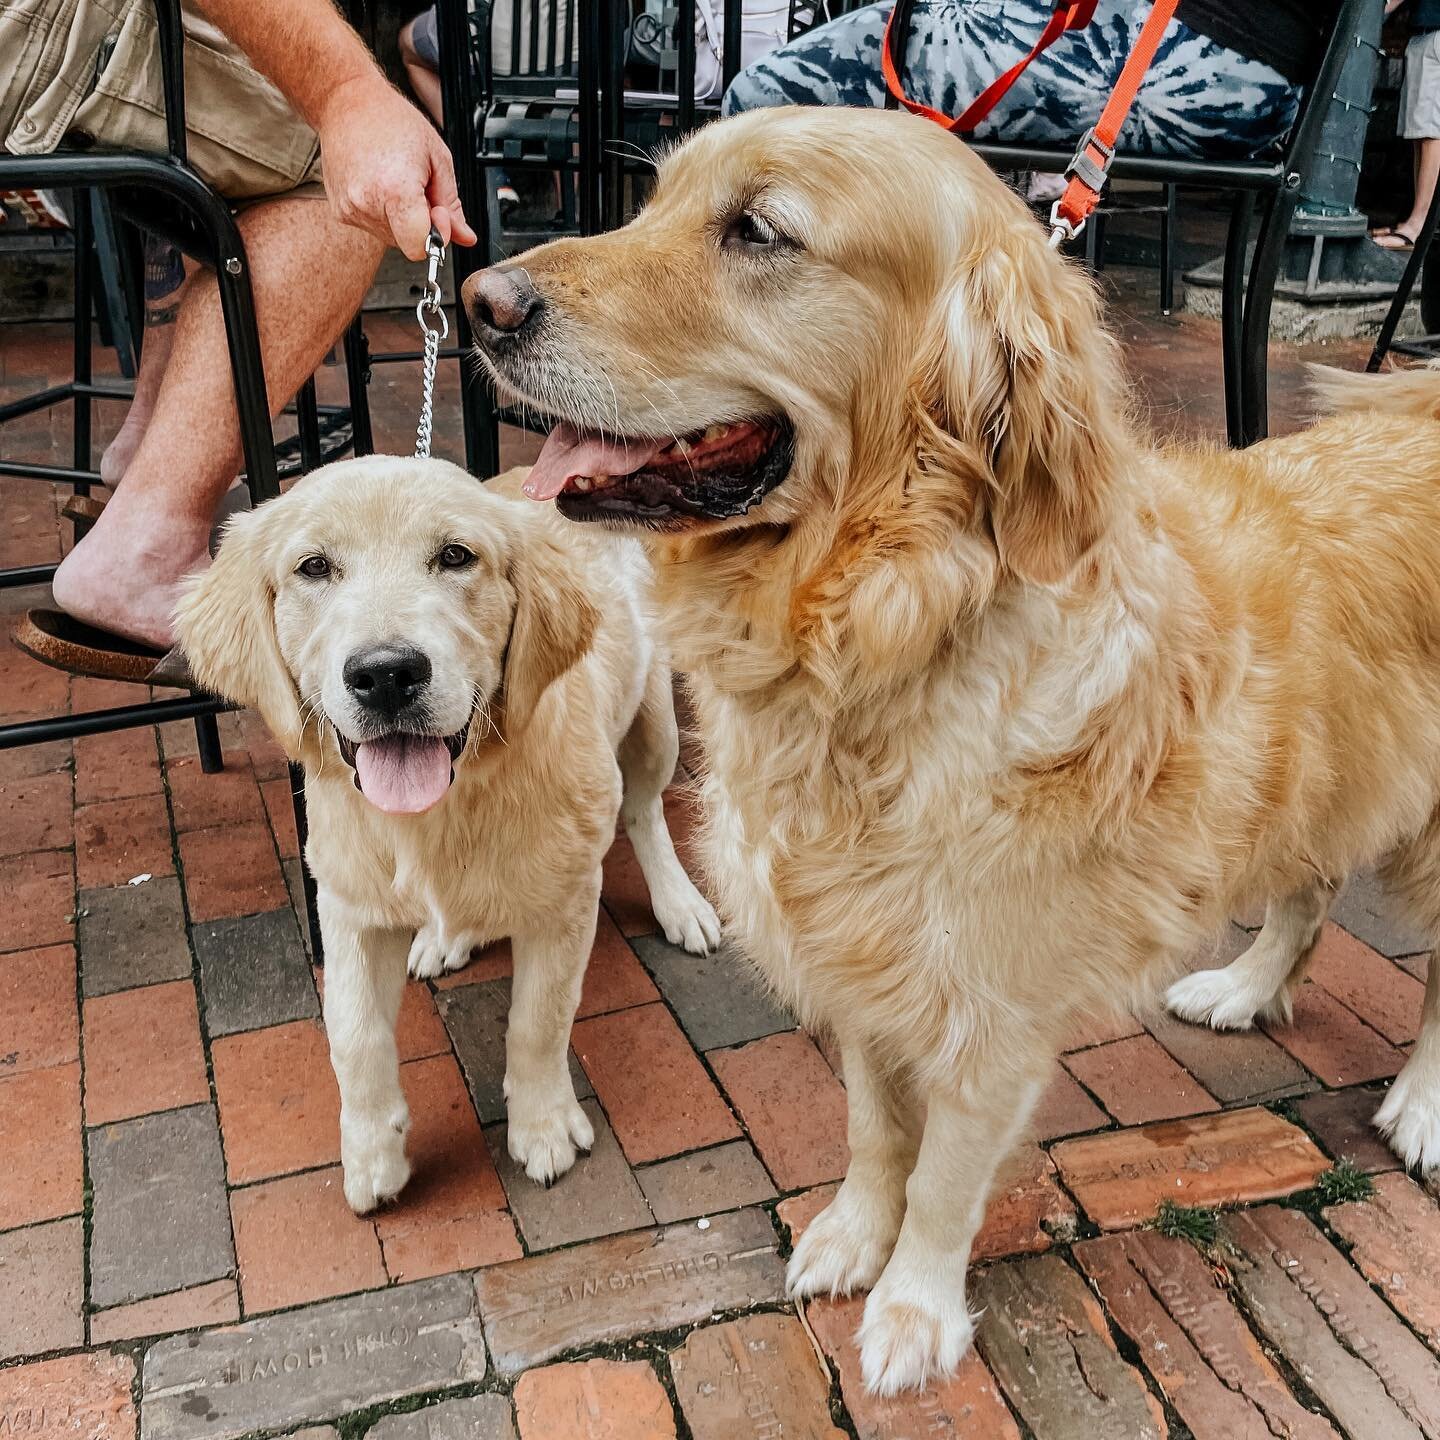 ✨ golden hour ✨

It&rsquo;s a solid week to hang out on the patio! ☀️🐾 What&rsquo;s going on&hellip;

TUE- Pints After Pedals [Lynchburg&rsquo;s friendliest group ride] with our Jefferson Street neighbors, Bikes Unlimited! 🍻🚲 Spring evenings, new 